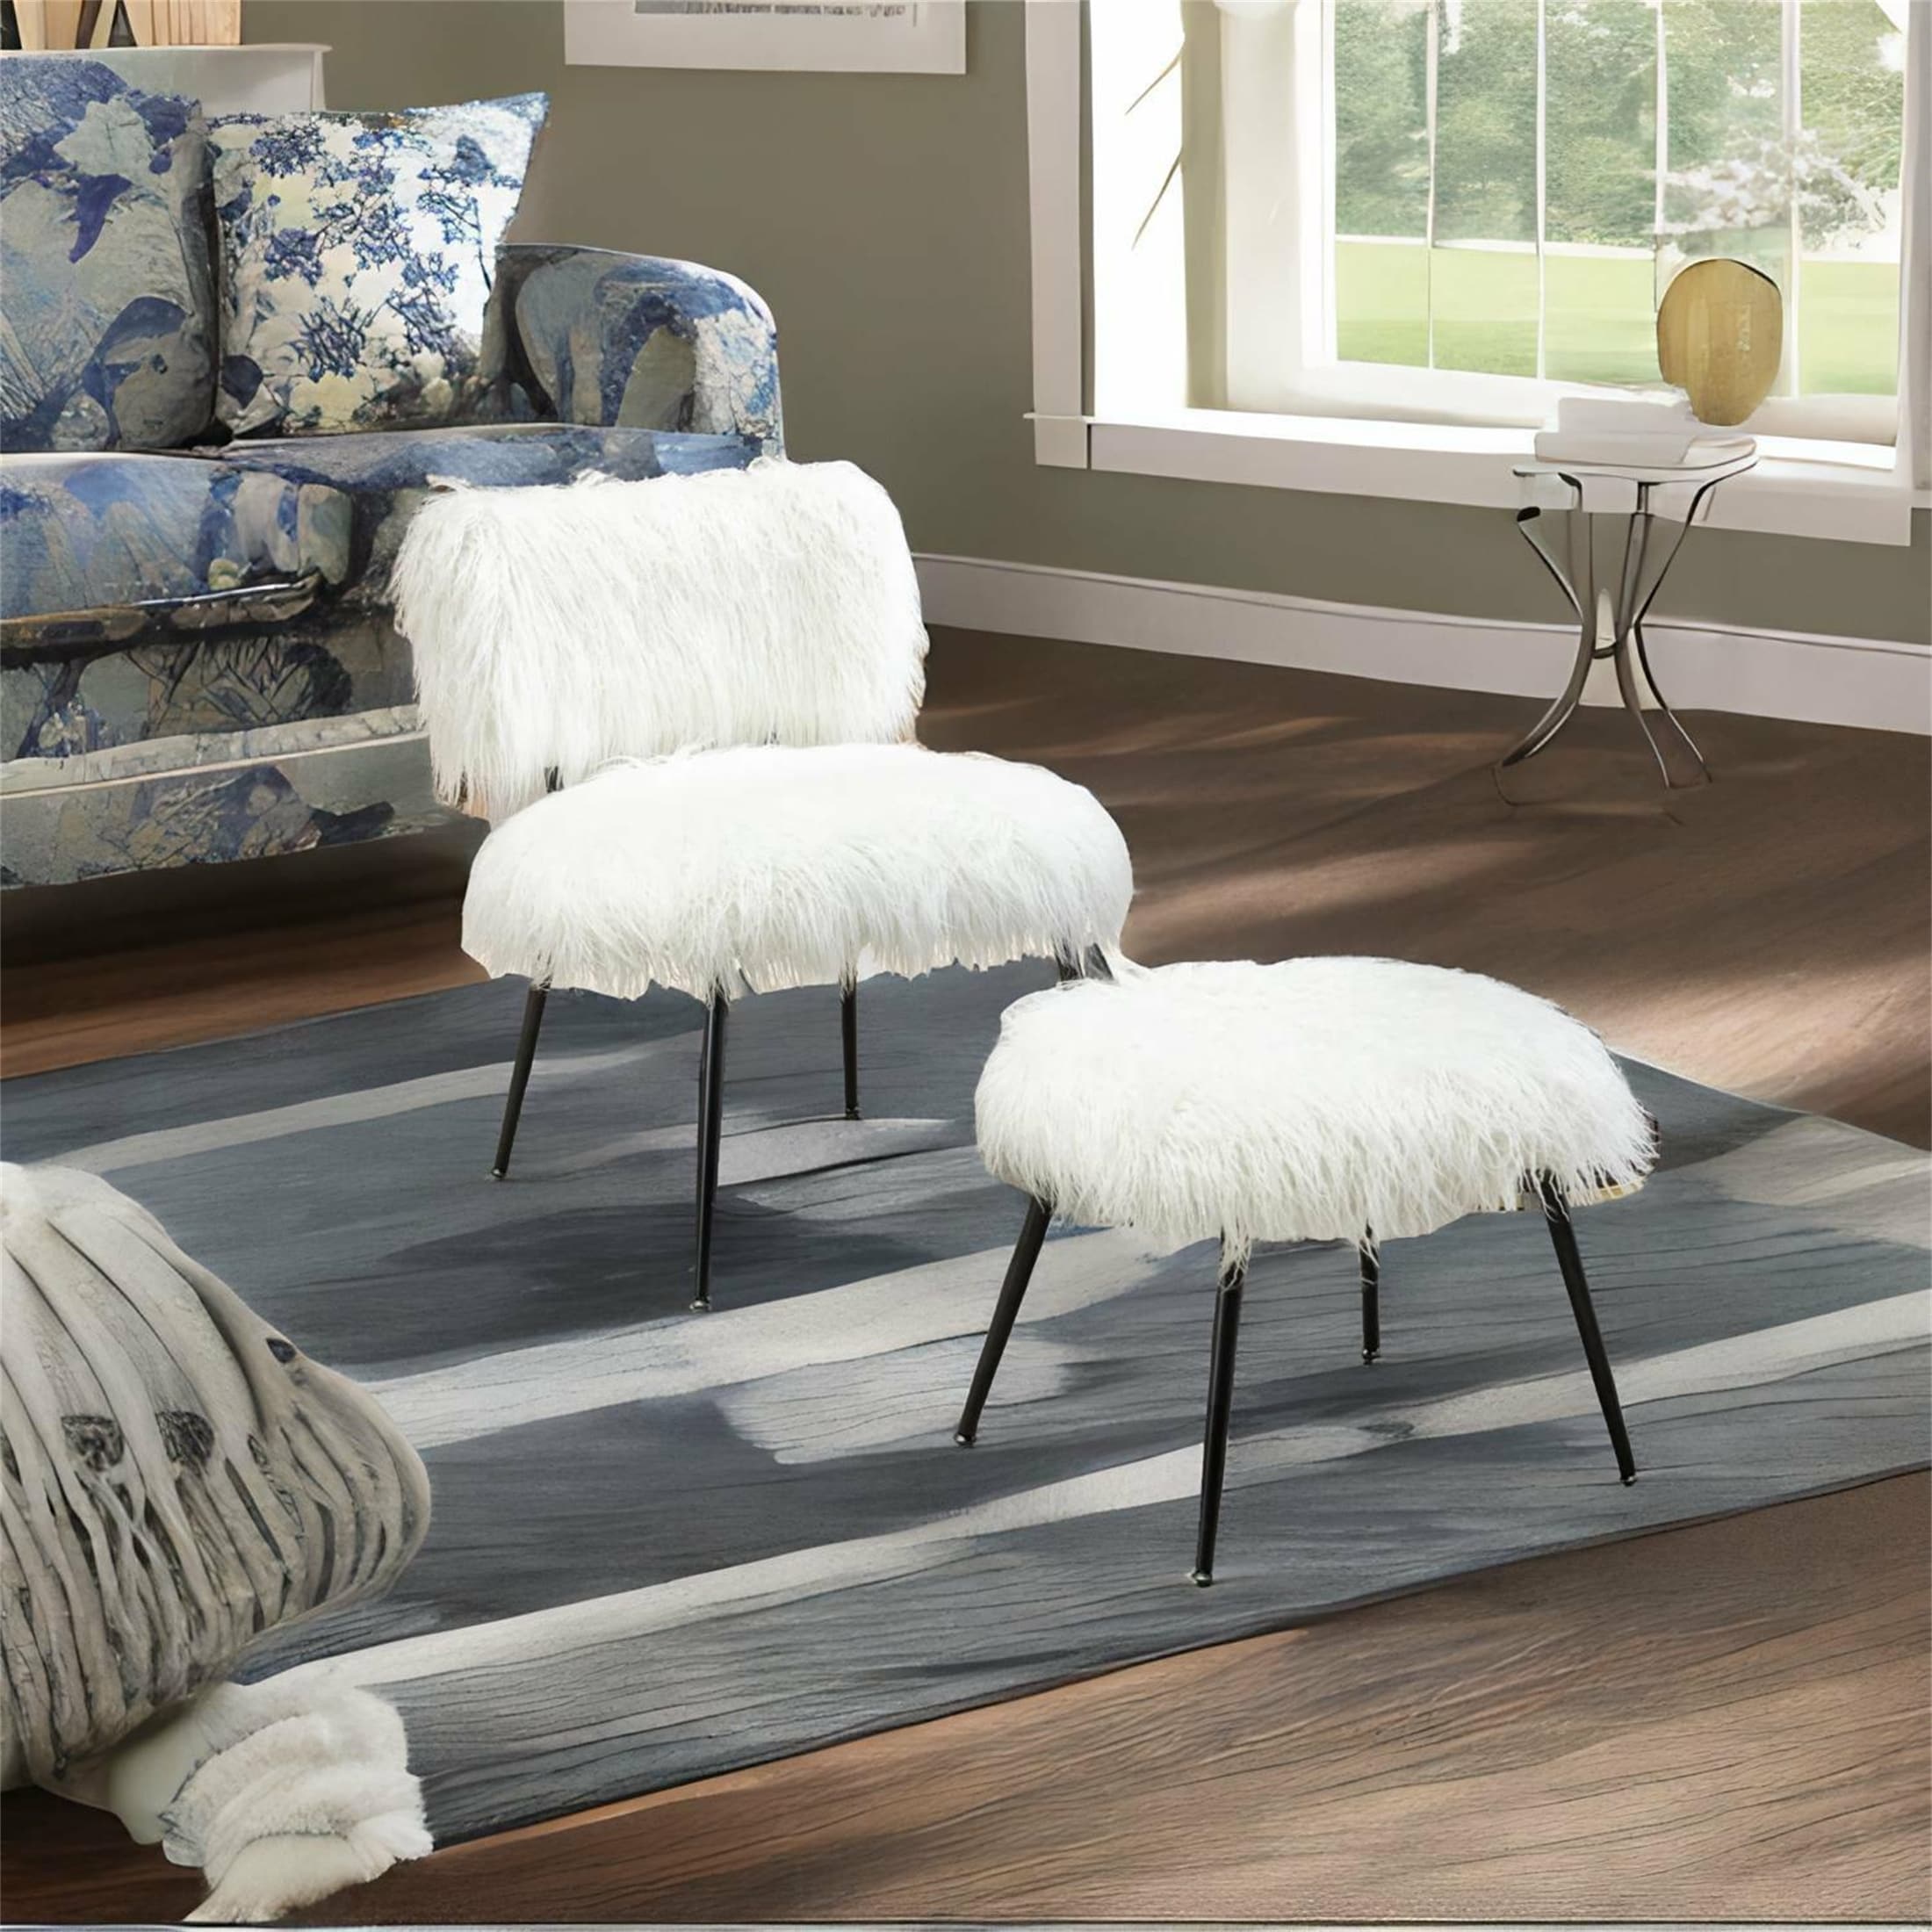 https://ak1.ostkcdn.com/images/products/is/images/direct/f8036e46b665cdb5572b541f4750e60b0fbf393d/Faux-Fur-Plush-Accent-Chair-With-Ottoman-for-Living-Room.jpg